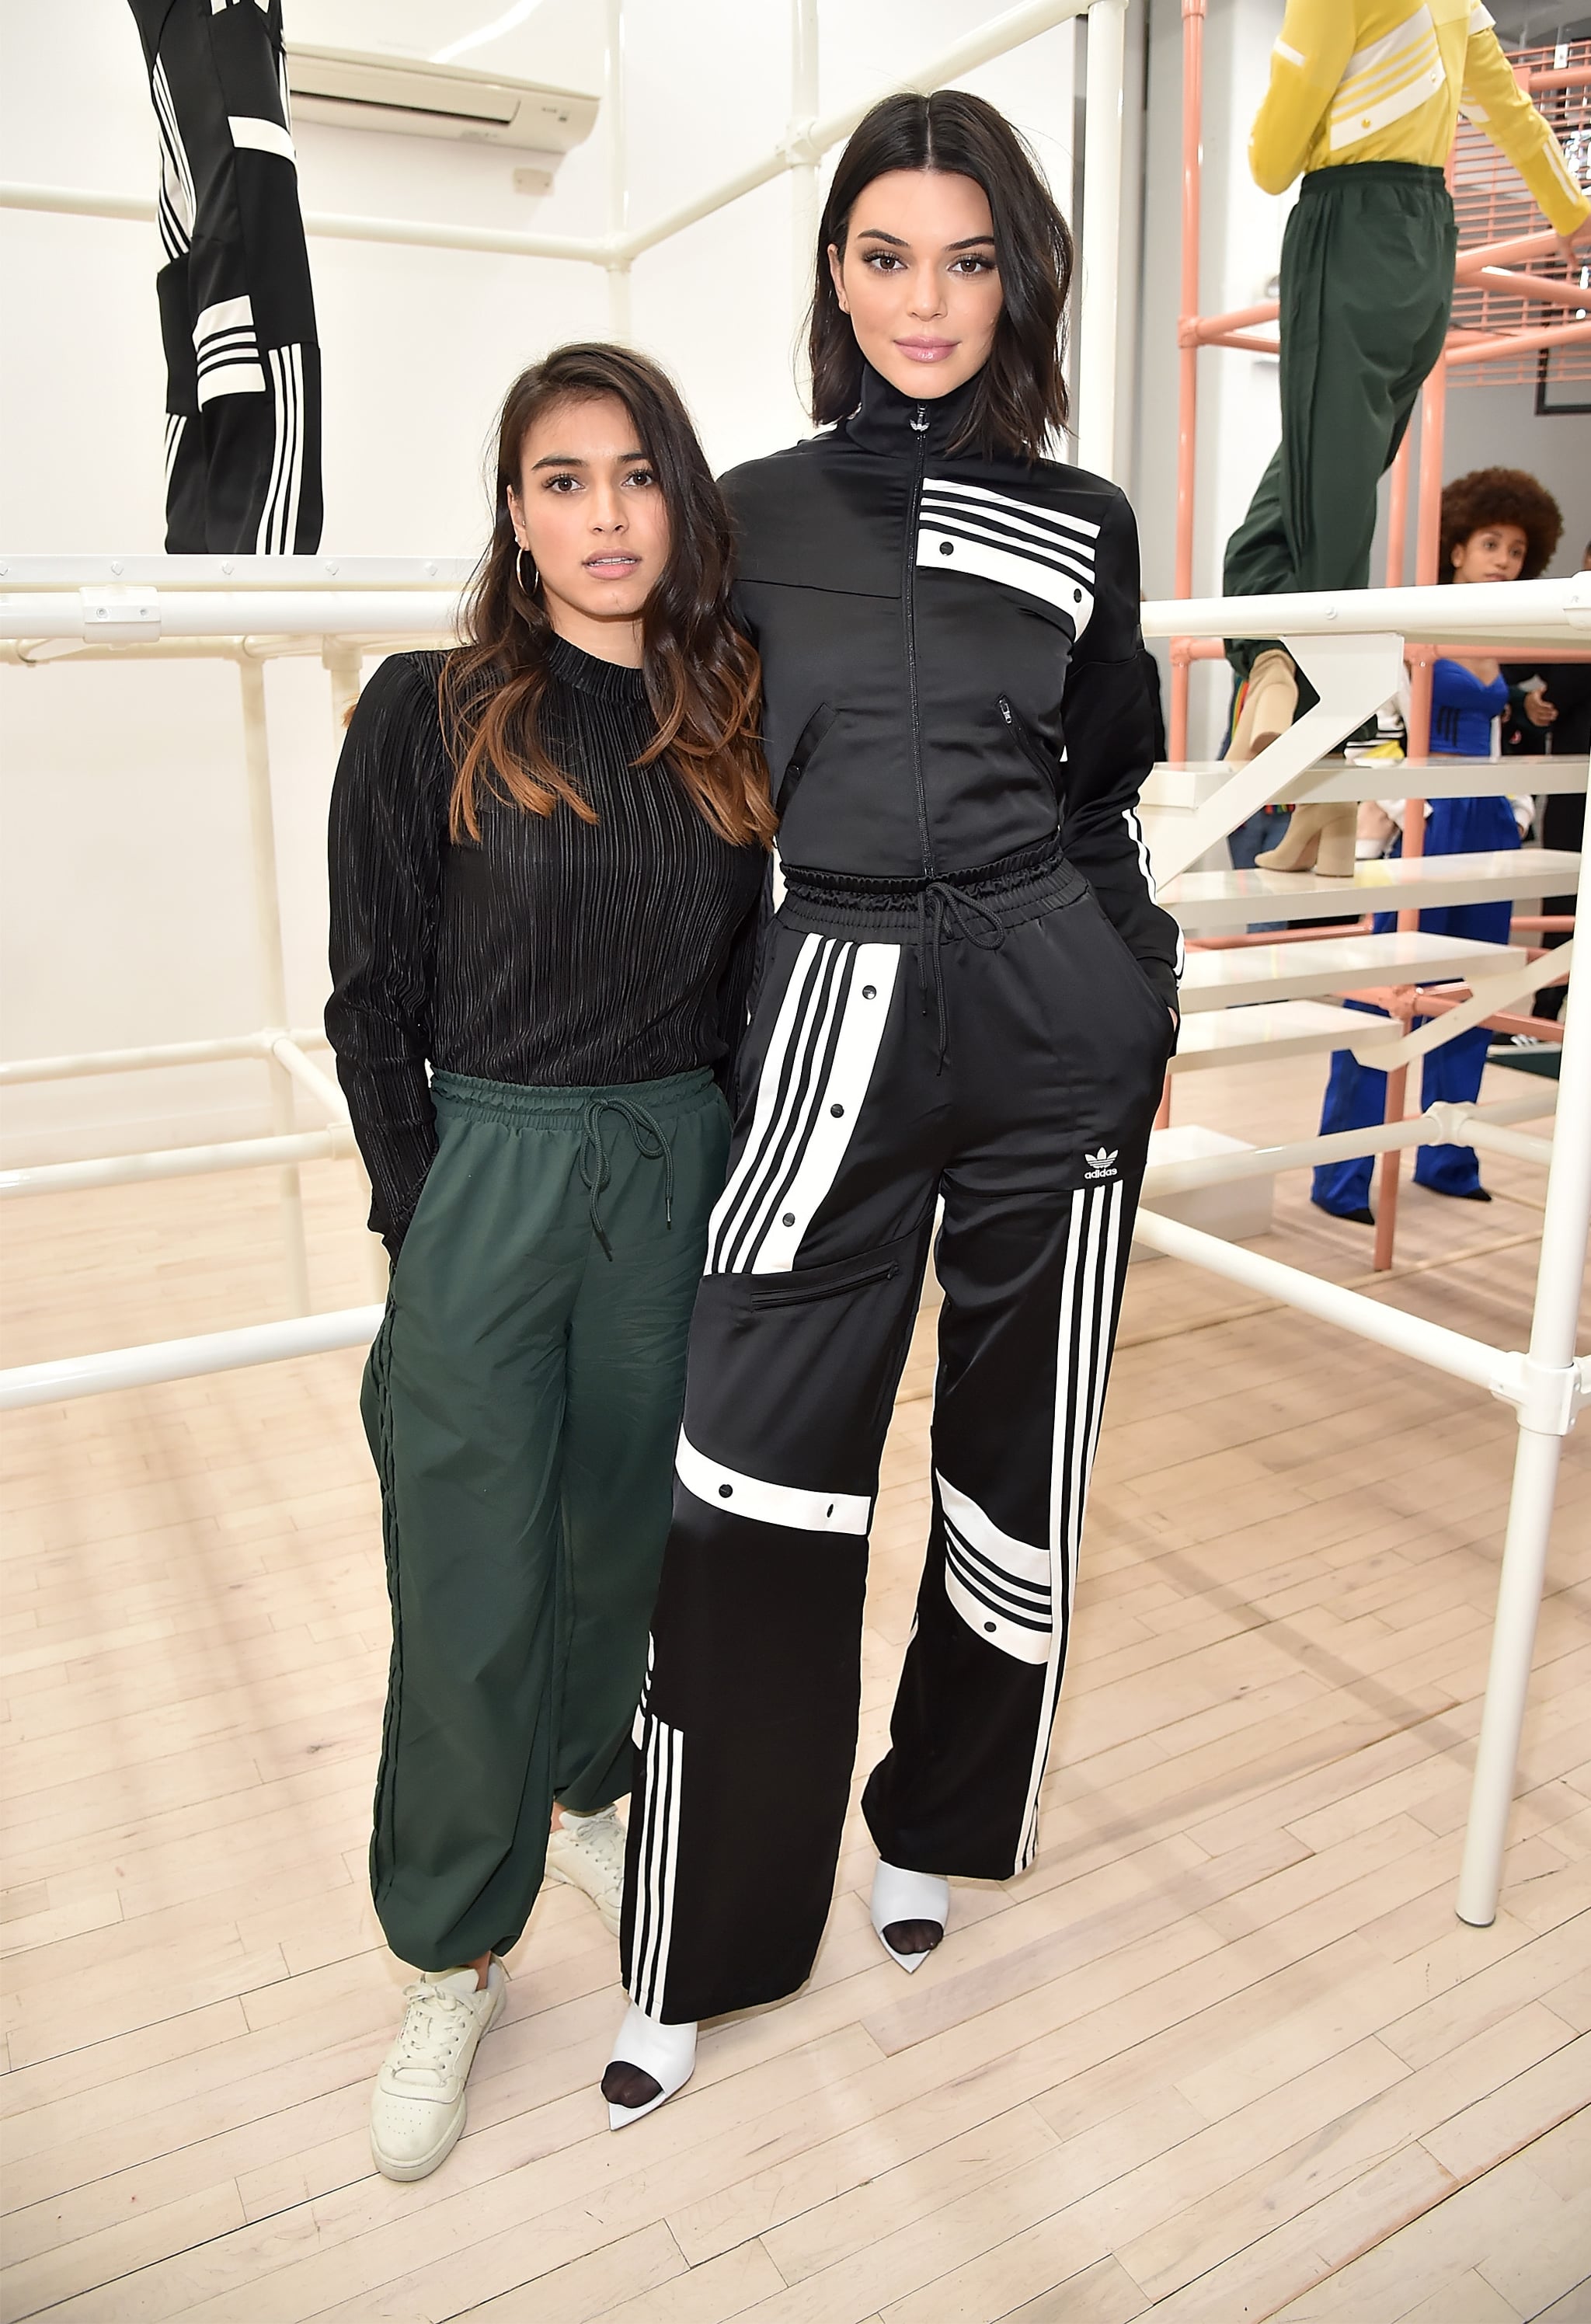 Onafhankelijk binden Meer Kendall attended the Adidas presentation, celebrating designer | Kendall  Jenner's New York Fashion Week Has Been All About the Parties | POPSUGAR  Fashion Photo 6